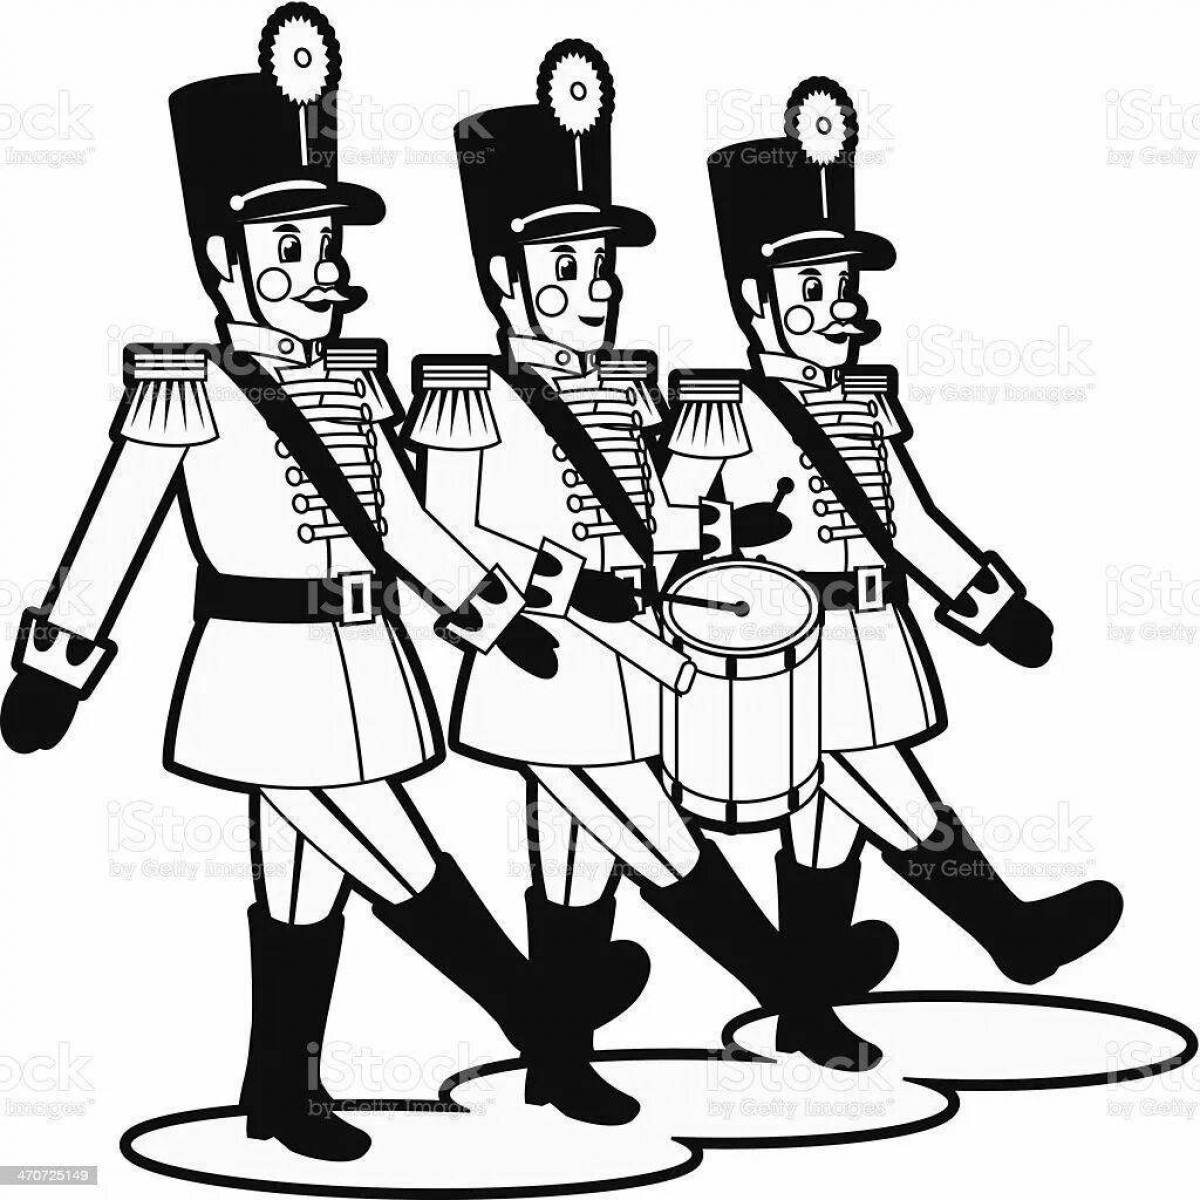 Fancy coloring tin soldiers